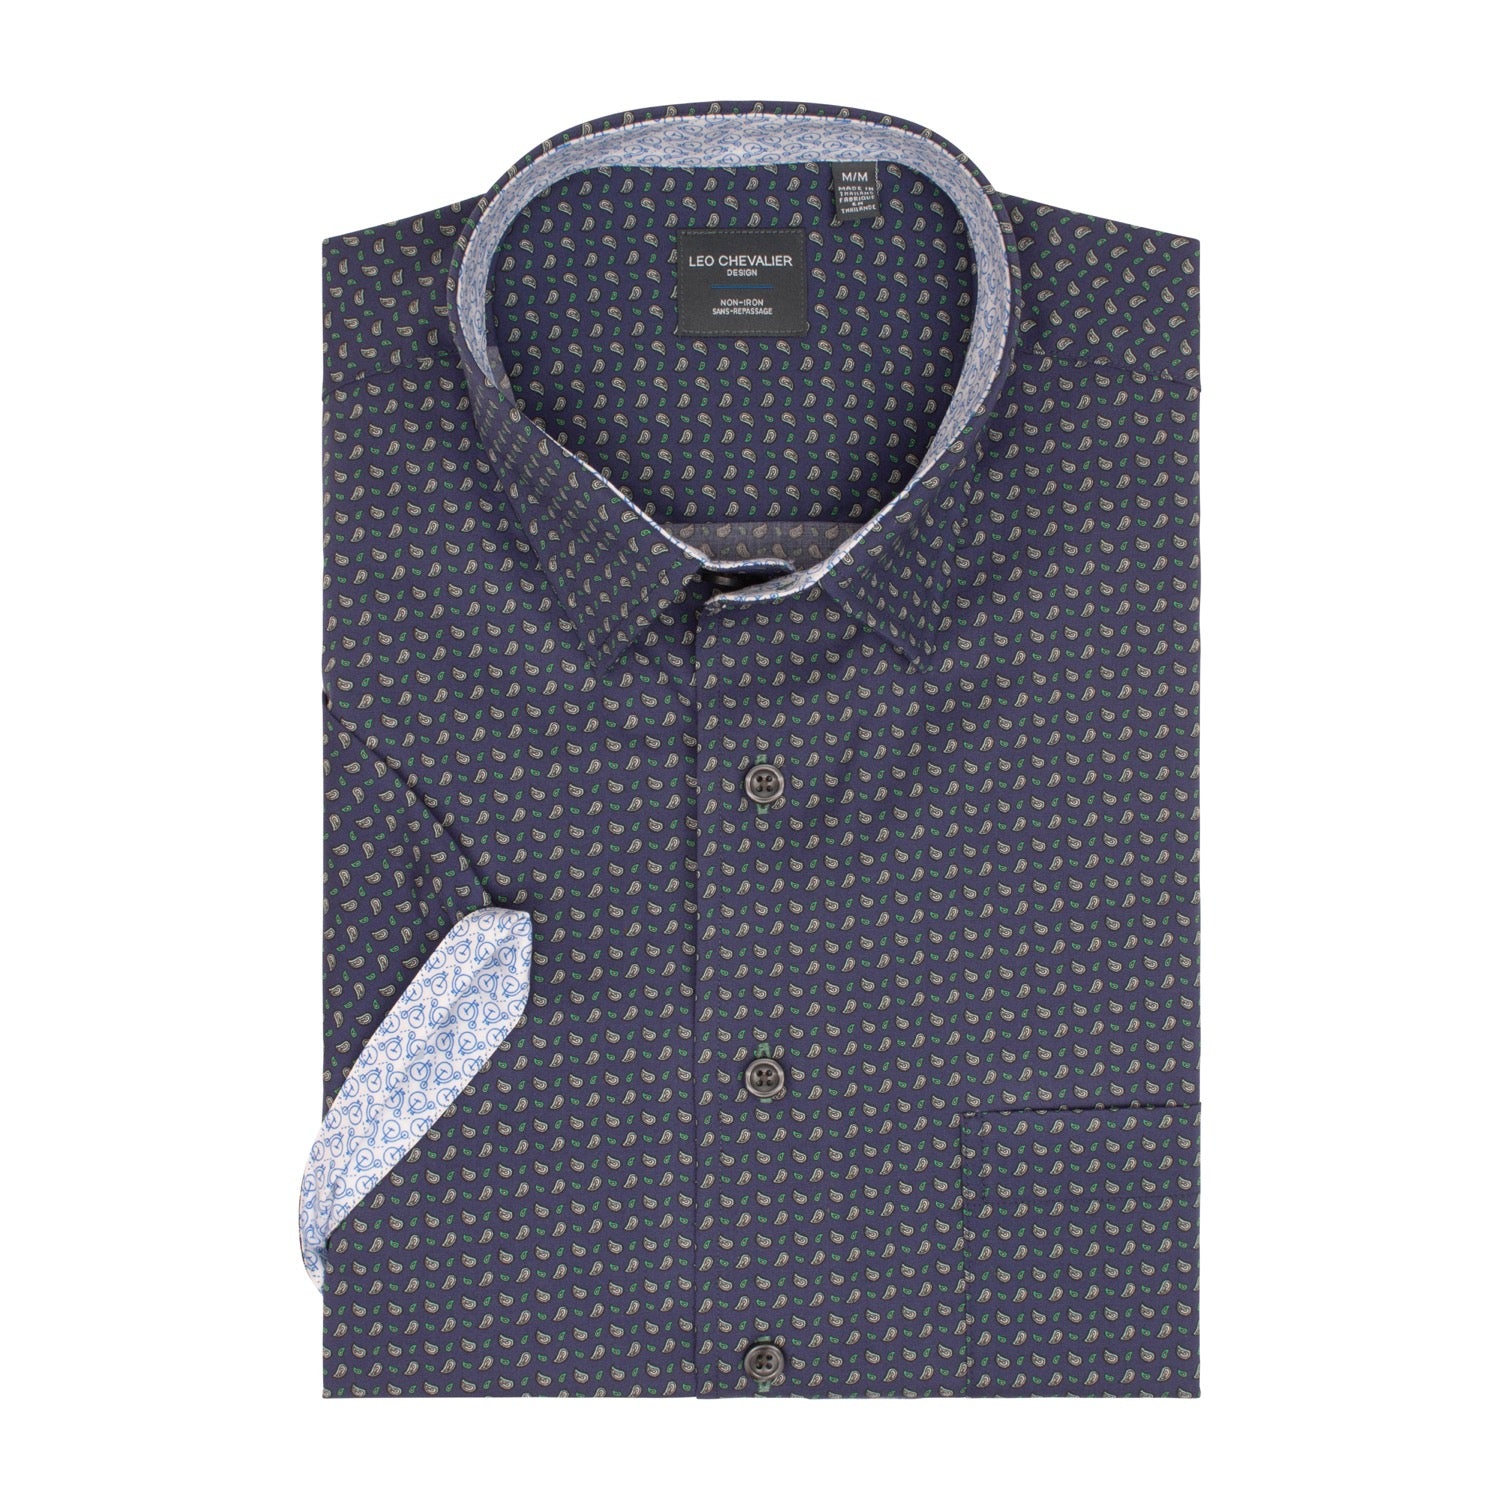 Navy Paisley Pine Print Short Sleeve No-Iron Cotton Sport Shirt with Hidden Button Down Collar by Leo Chevalier